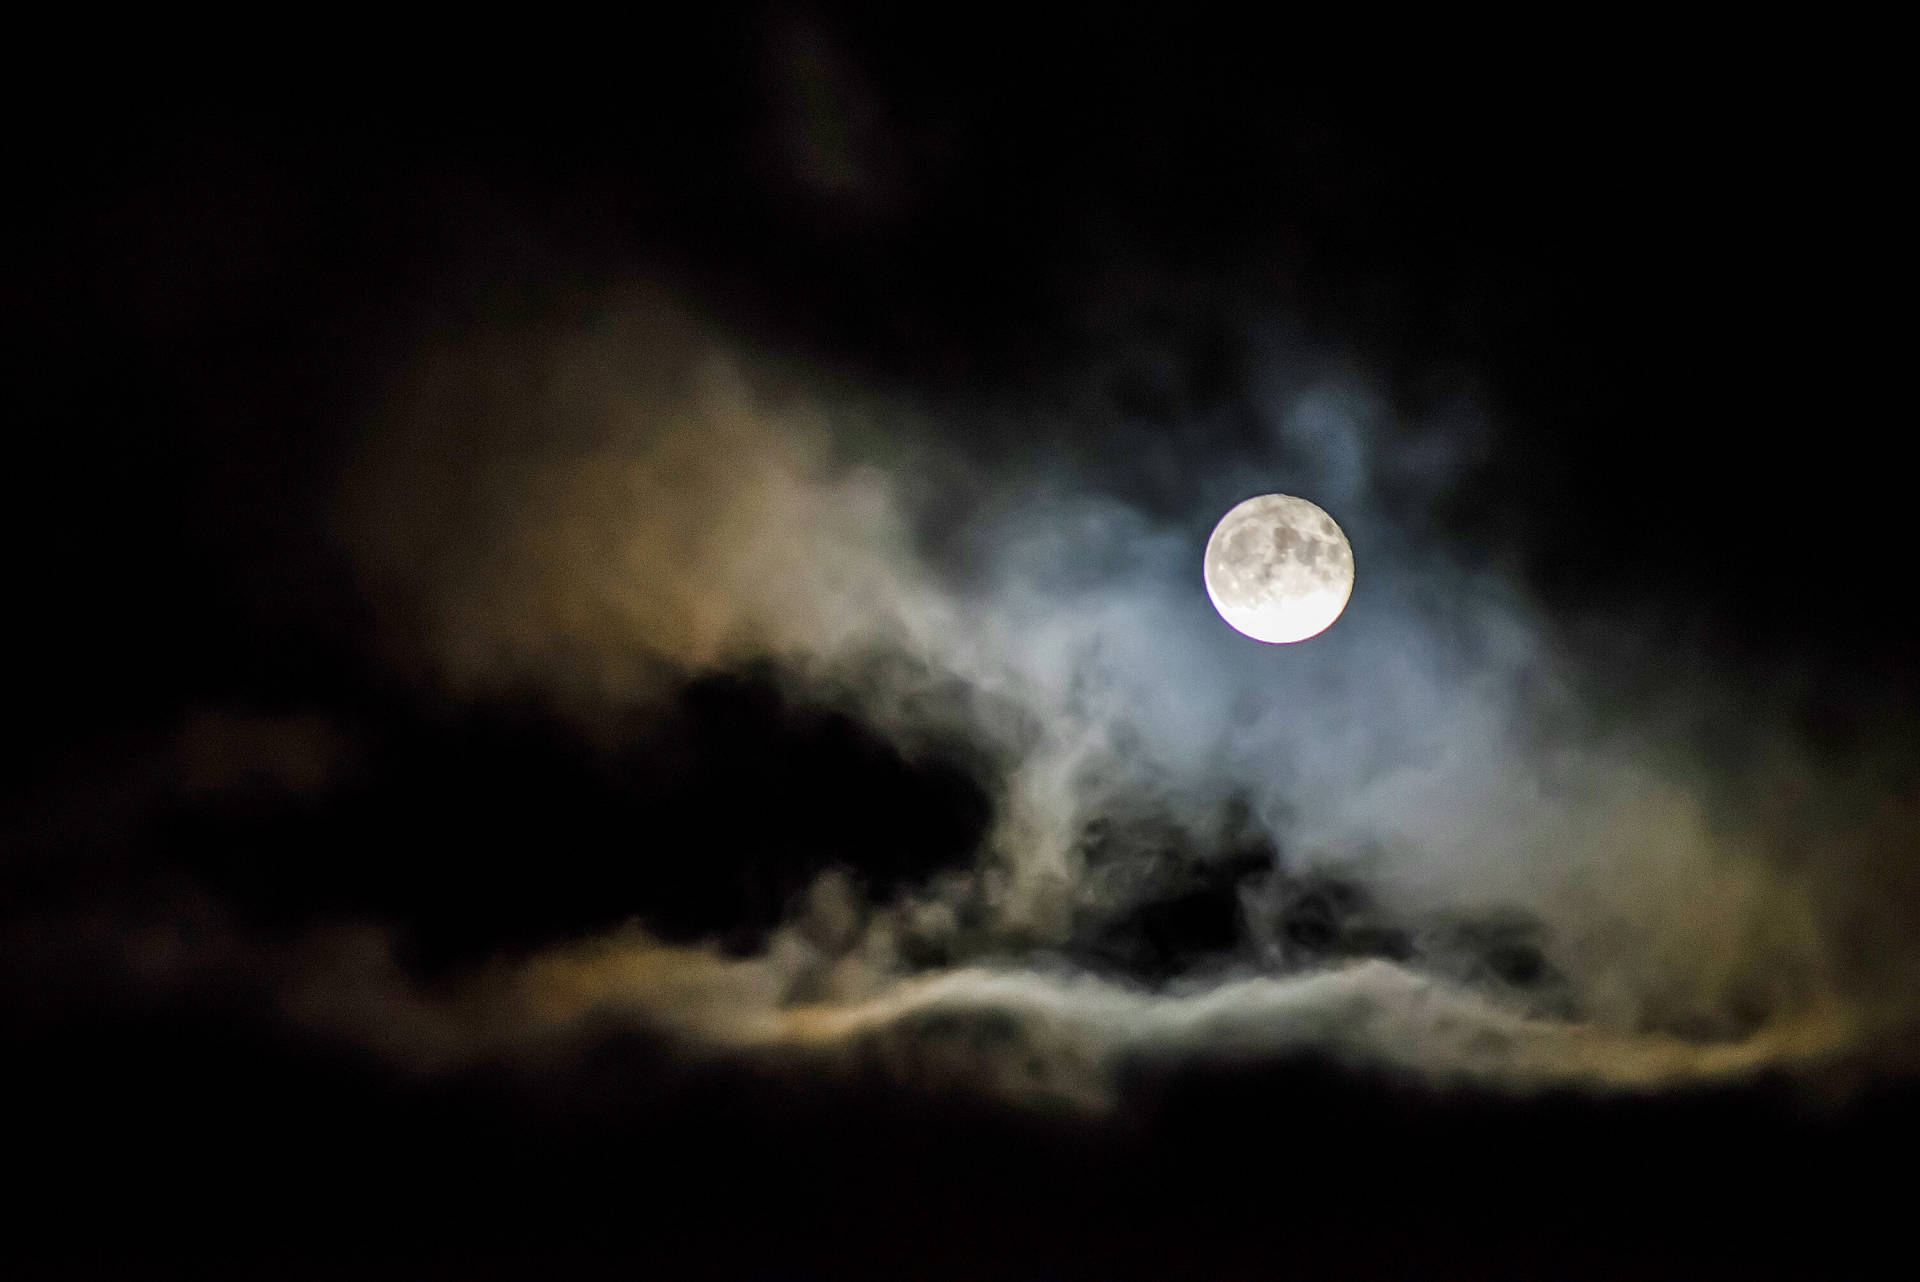 Full Moon In Clouds